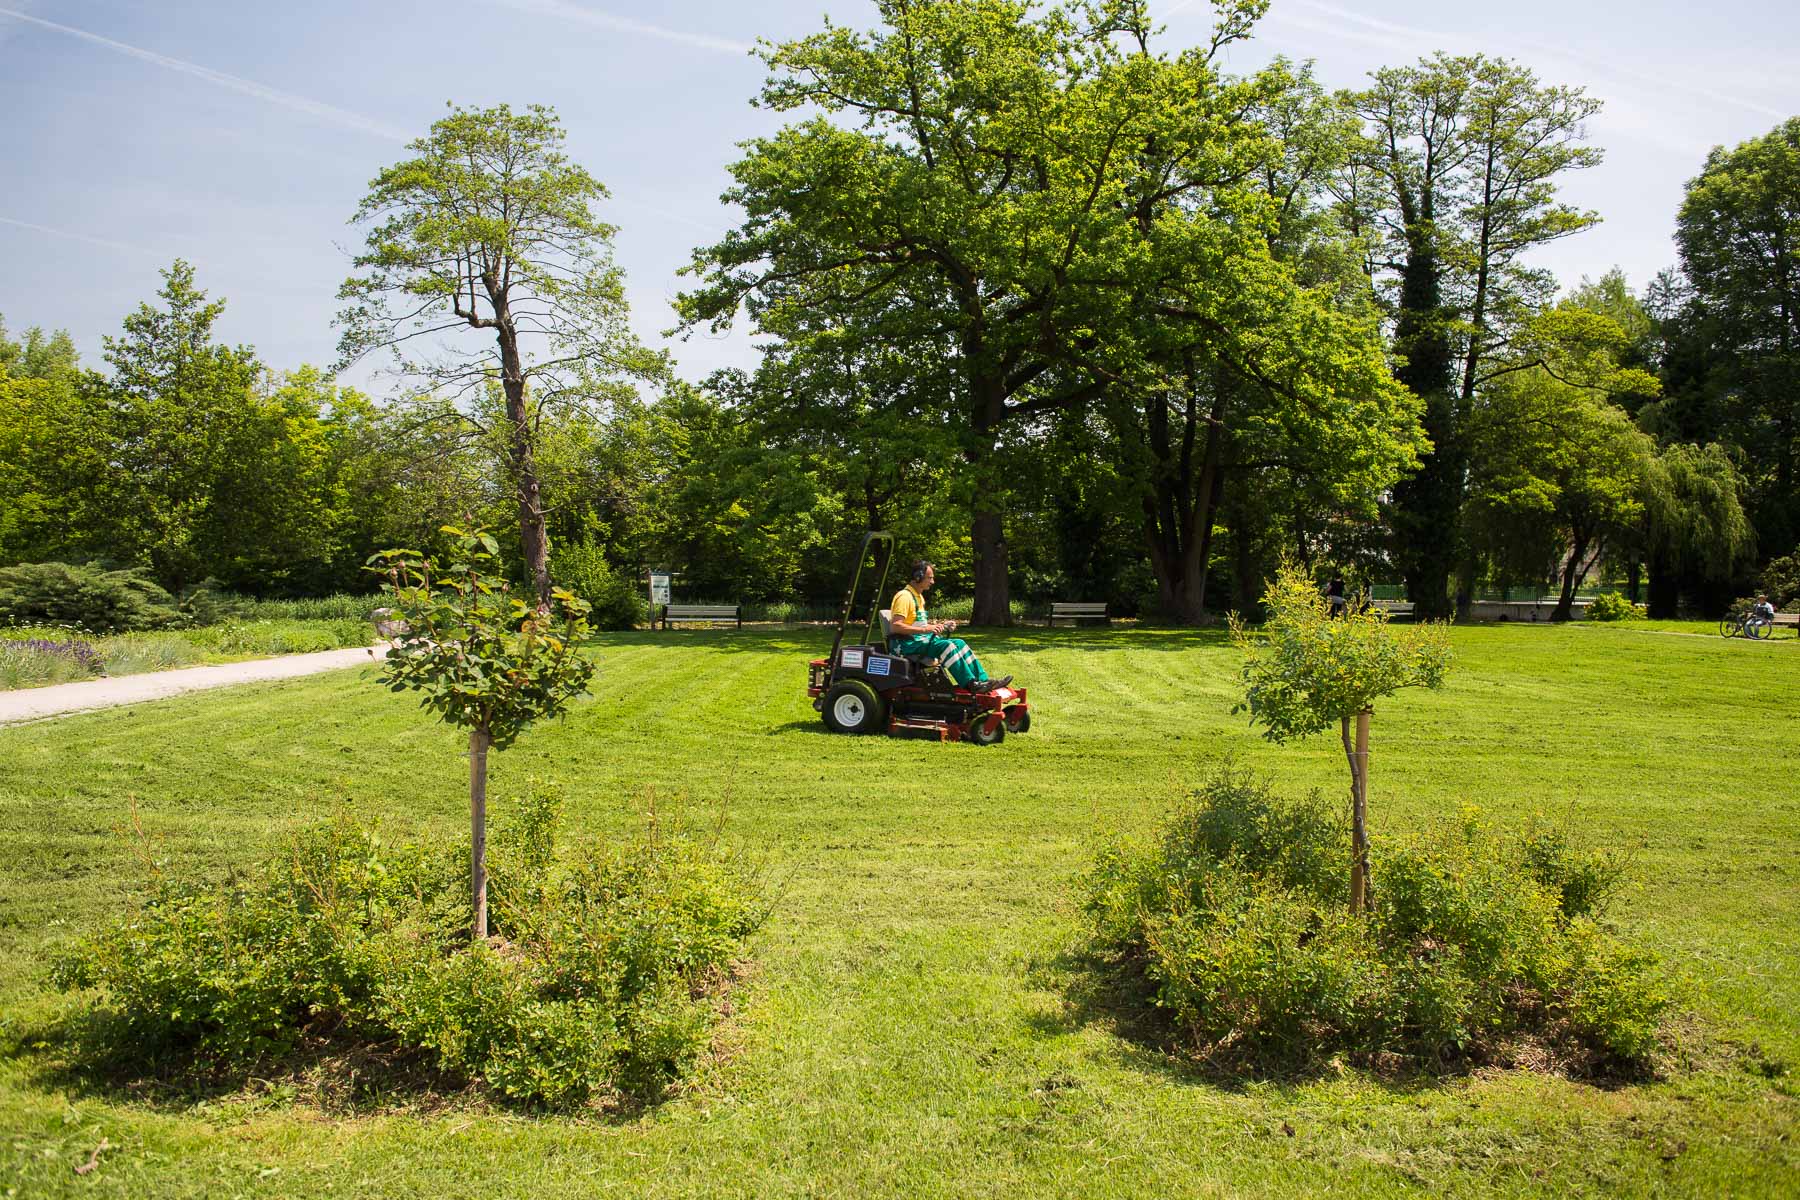 The Municipality of Ljubljana agreed with public services to start cutting grass in the city later, because one of the problem of losing pasture for bees was cutting grass too early, before grass plants were in full bloom.